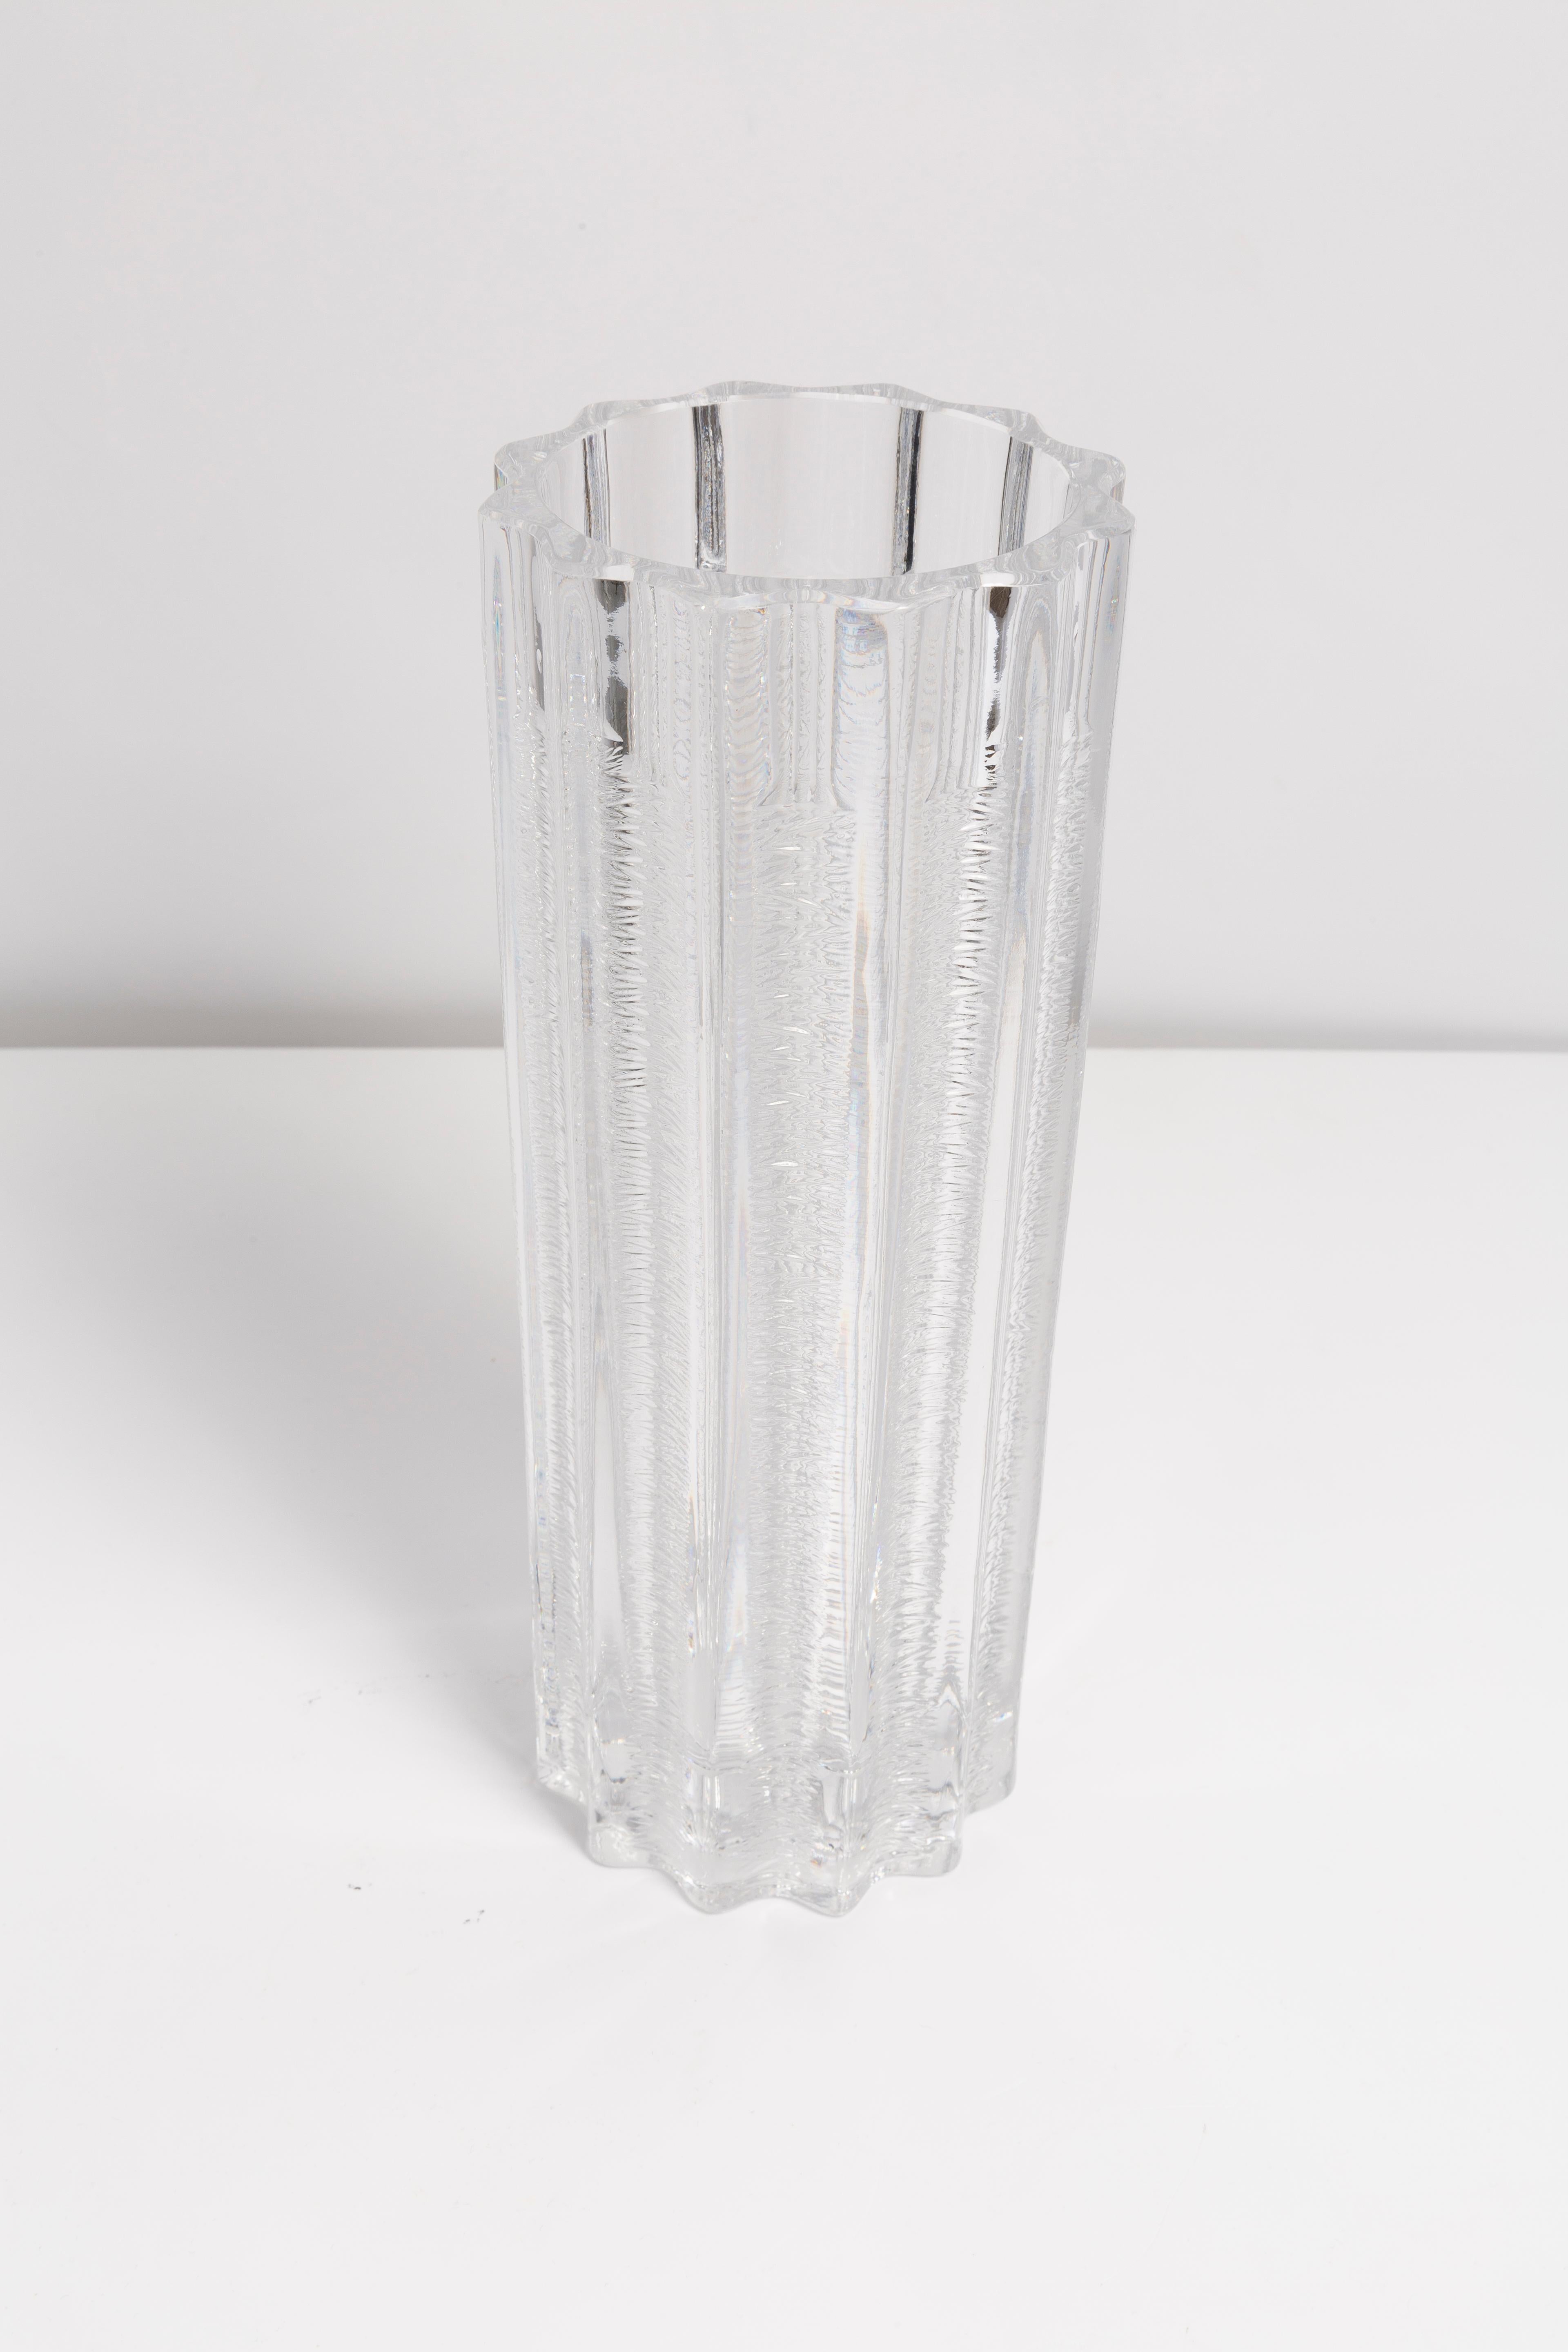 Transparent vase in amazing shape. Produced in 1960s.
Glass in perfect condition. The vase looks like it has just been taken out of the box.

No jags, defects etc. The outer relief surface, the inner smooth. 
Thick glass vase, massive.

The